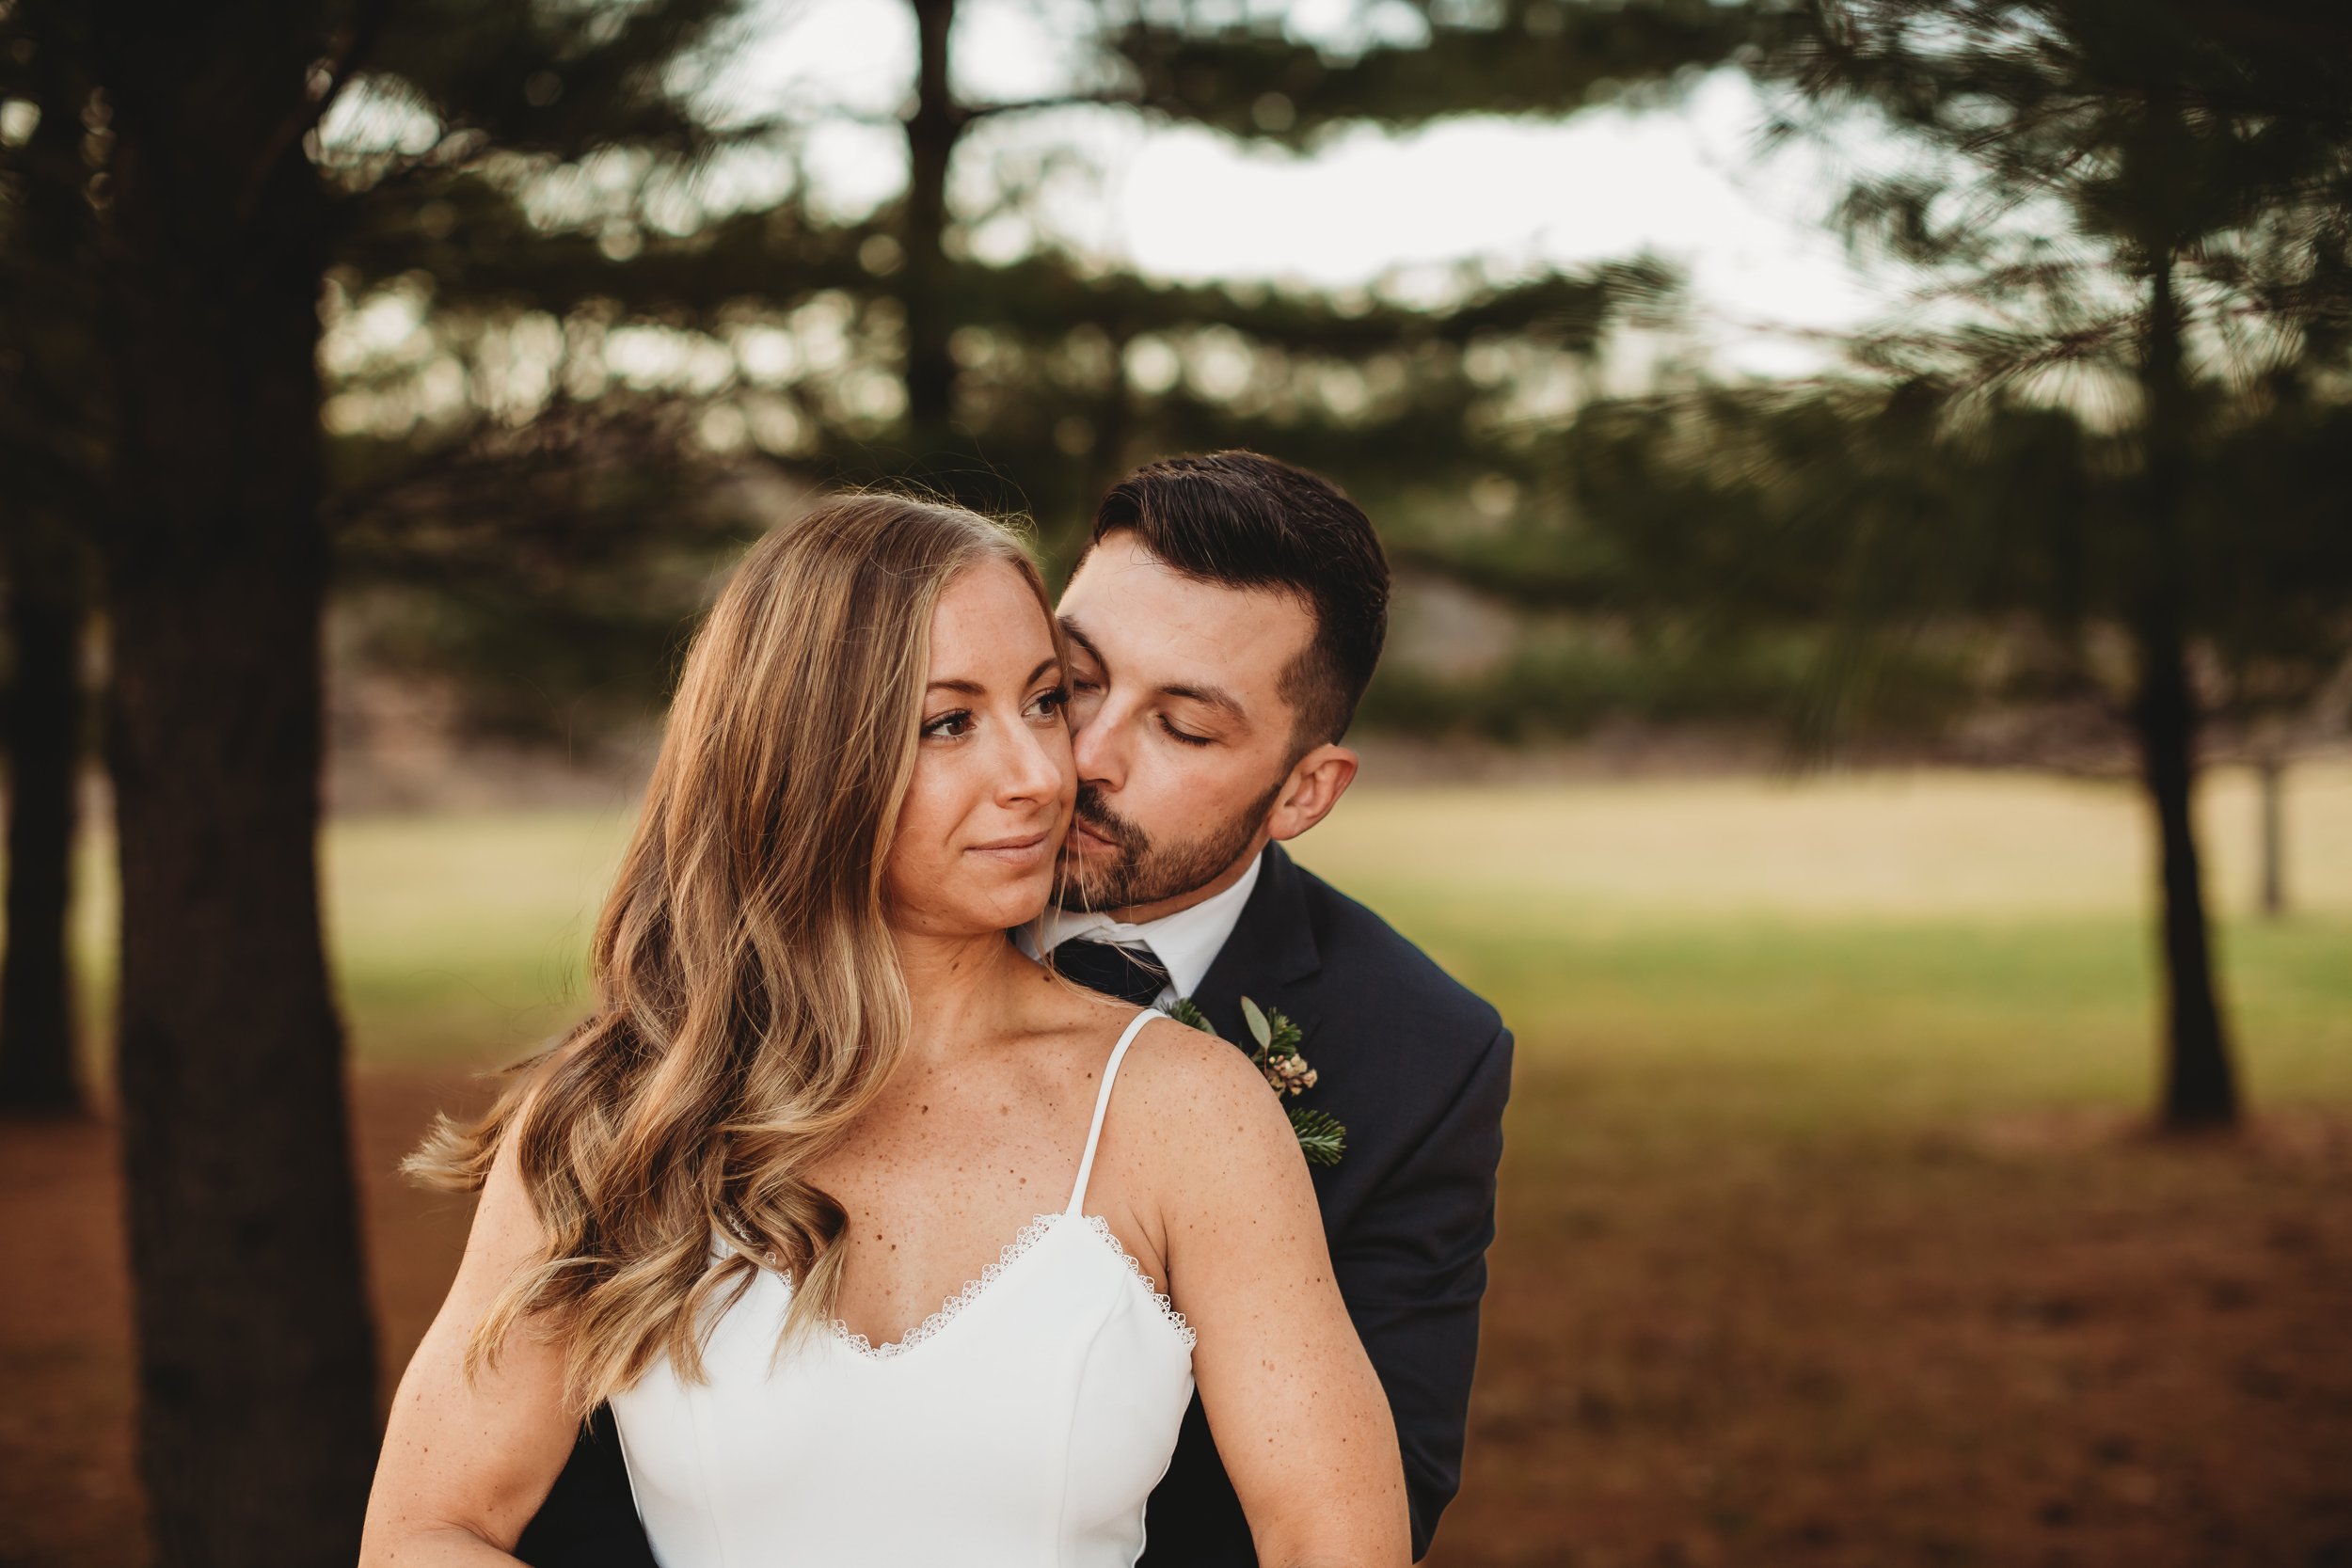  Wedding photographer Teala Ward Photography captures a groom and bride in a forest in LaSalle, IL. winter weddings outdoor bridal pics #tealawardphotography #tealawardweddings #LaSalleIllinois #IronwoodontheVermillion #weddingphotographyIL 